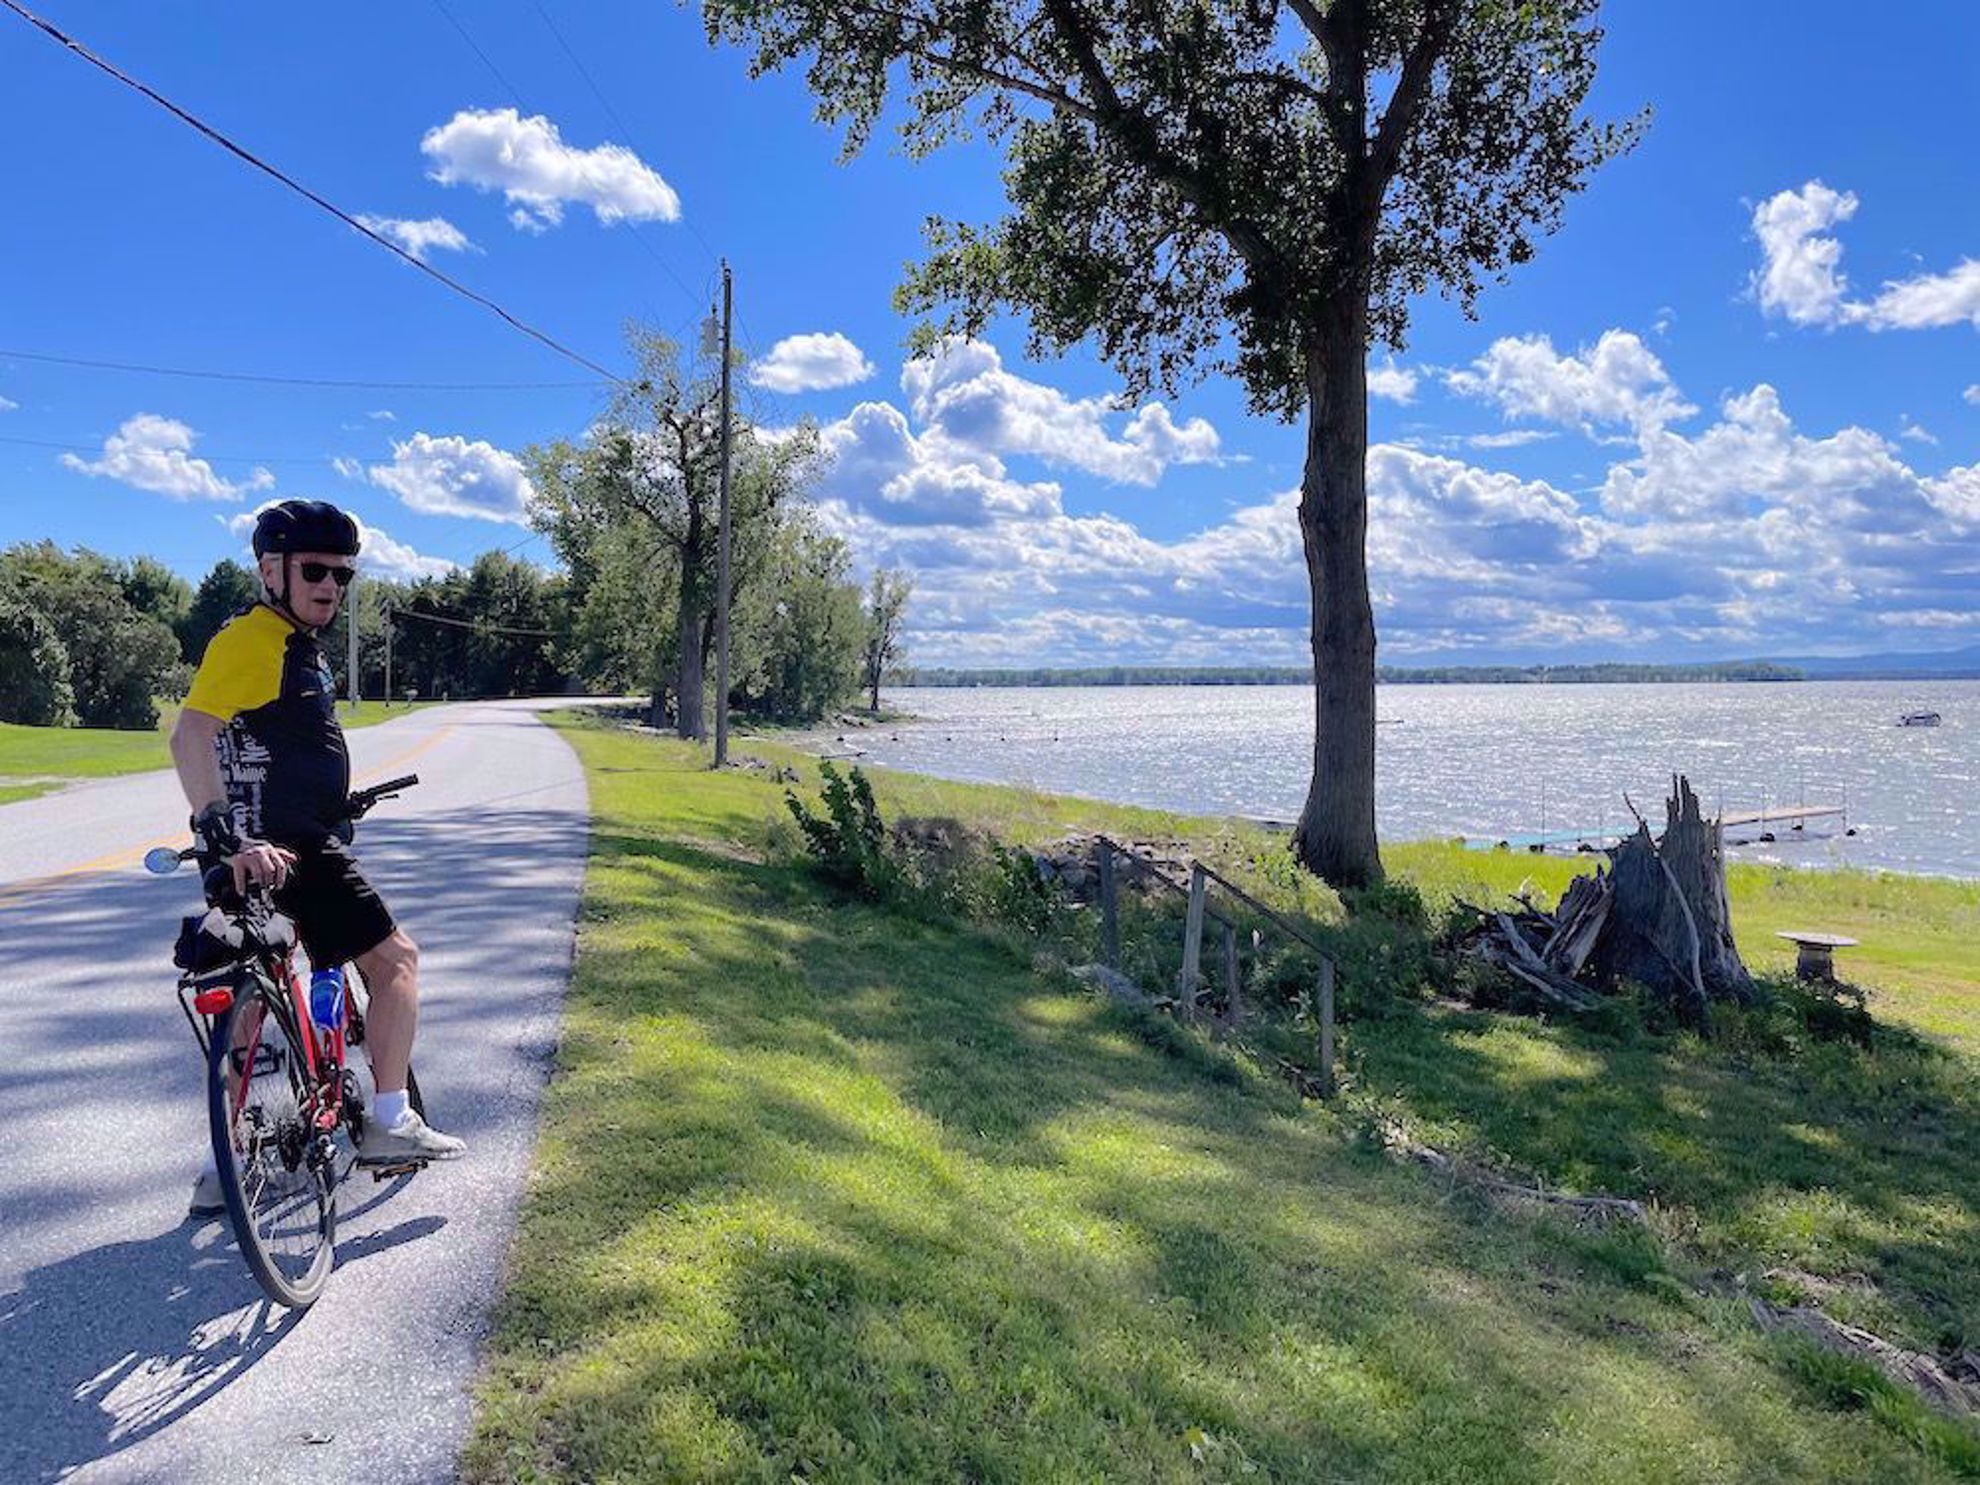 Riding on the island in Lake Champlain